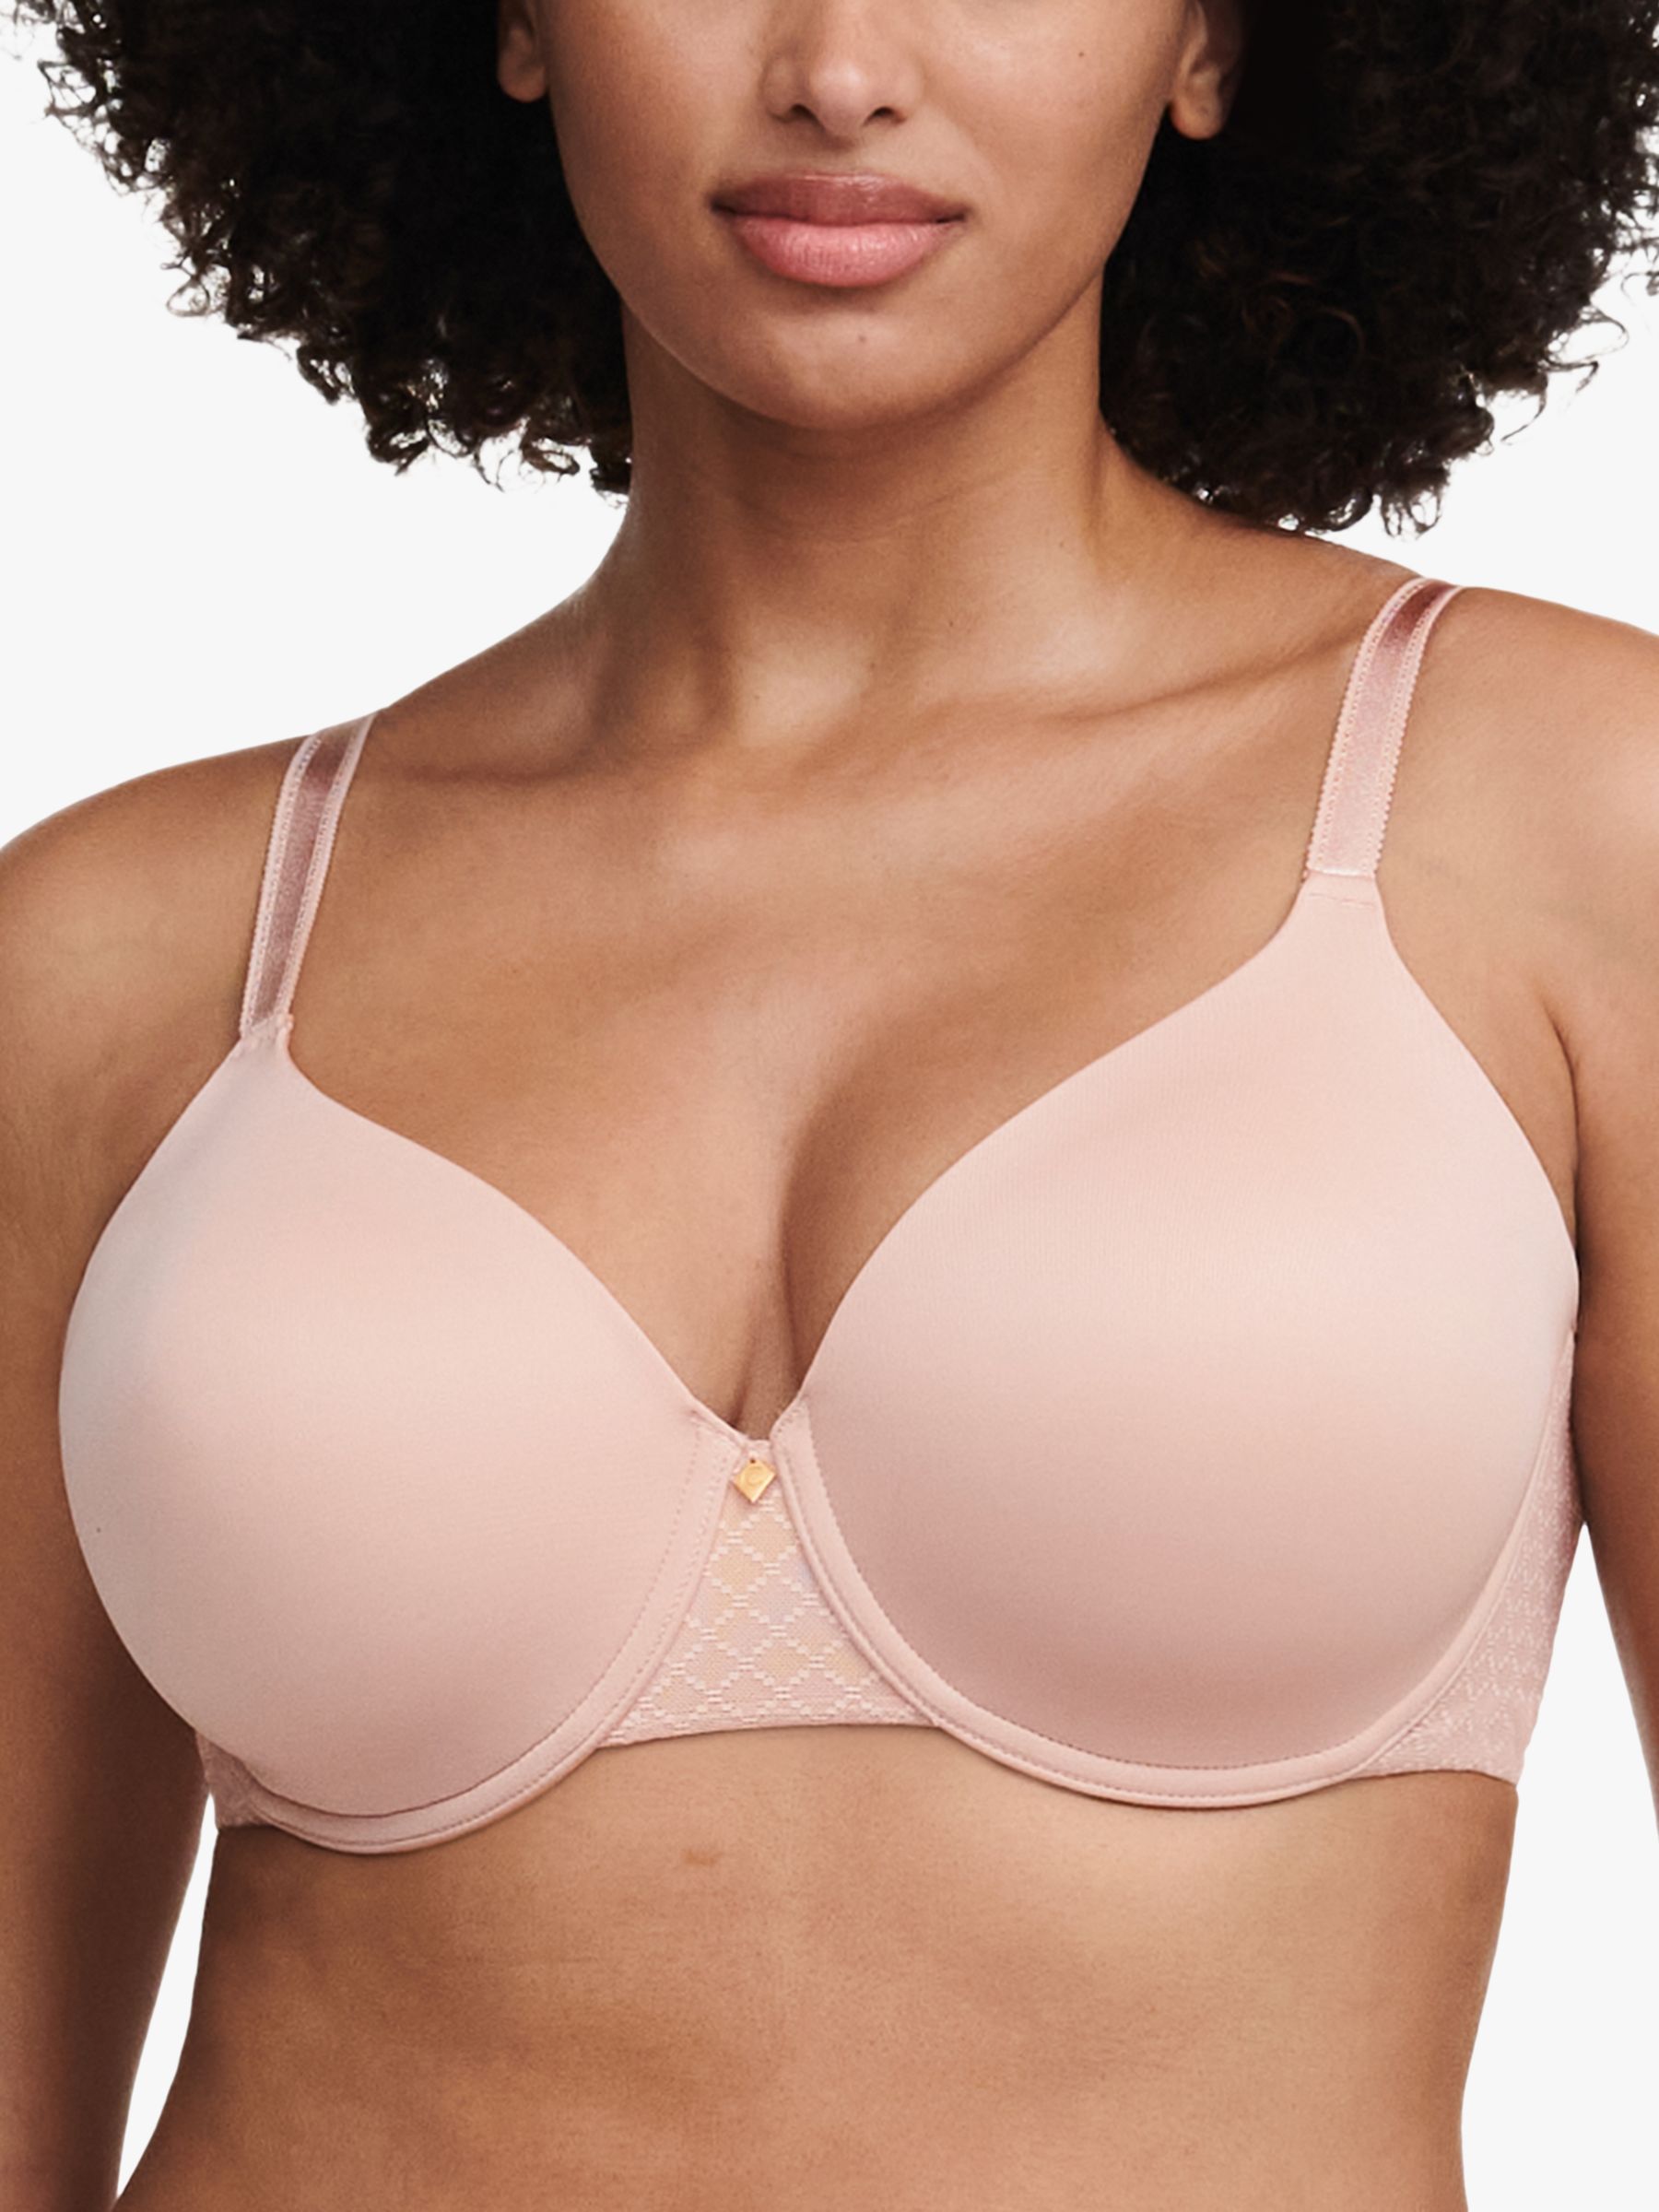 COVERED IN FULL! Soft Support, Shapely Cups, Stretchy Straps, Airy Lace, Bra  38D